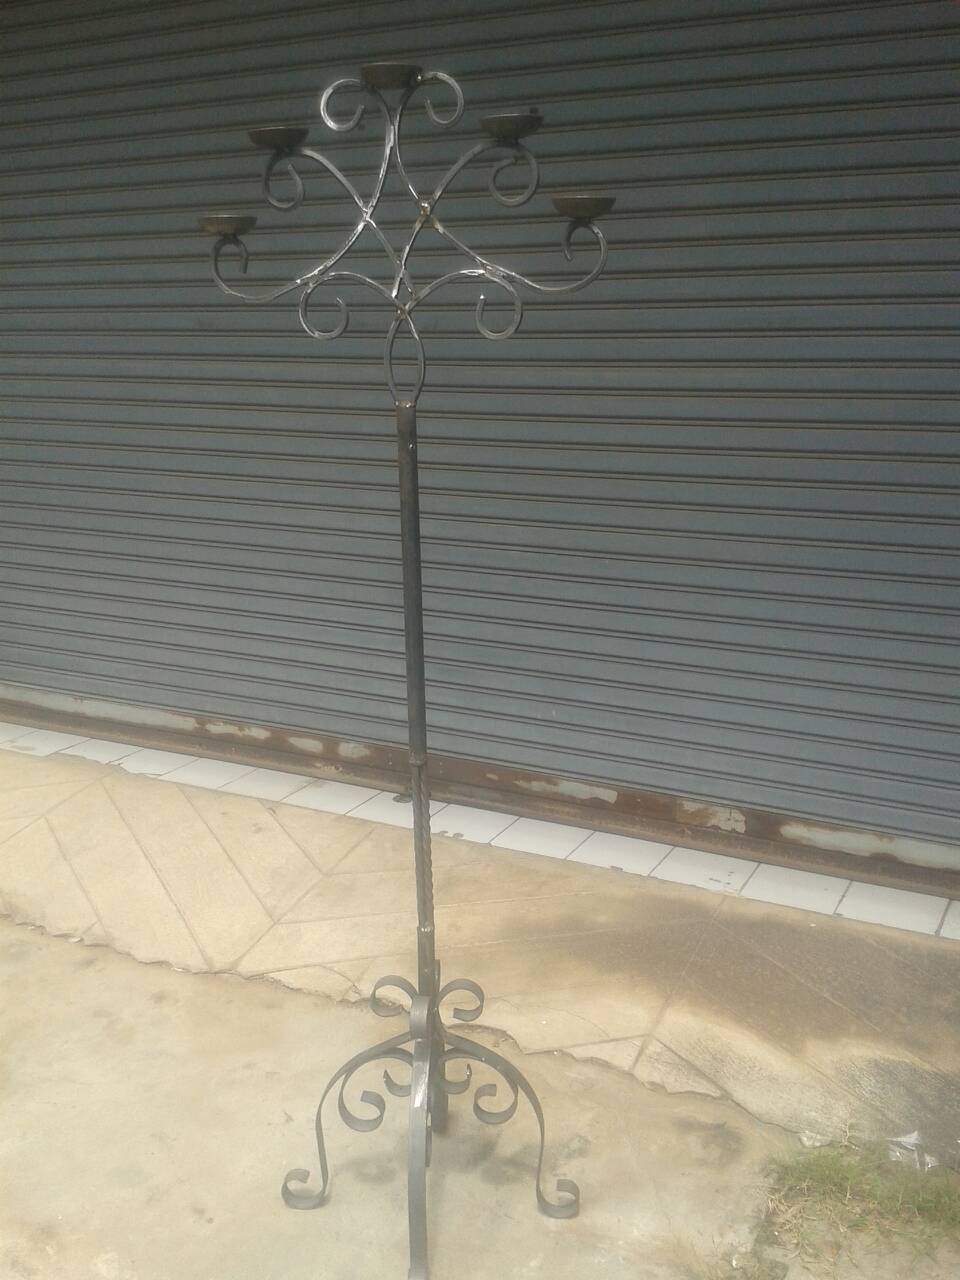 Floor iron candle Code FIC001 size high 165 cm. not finishing